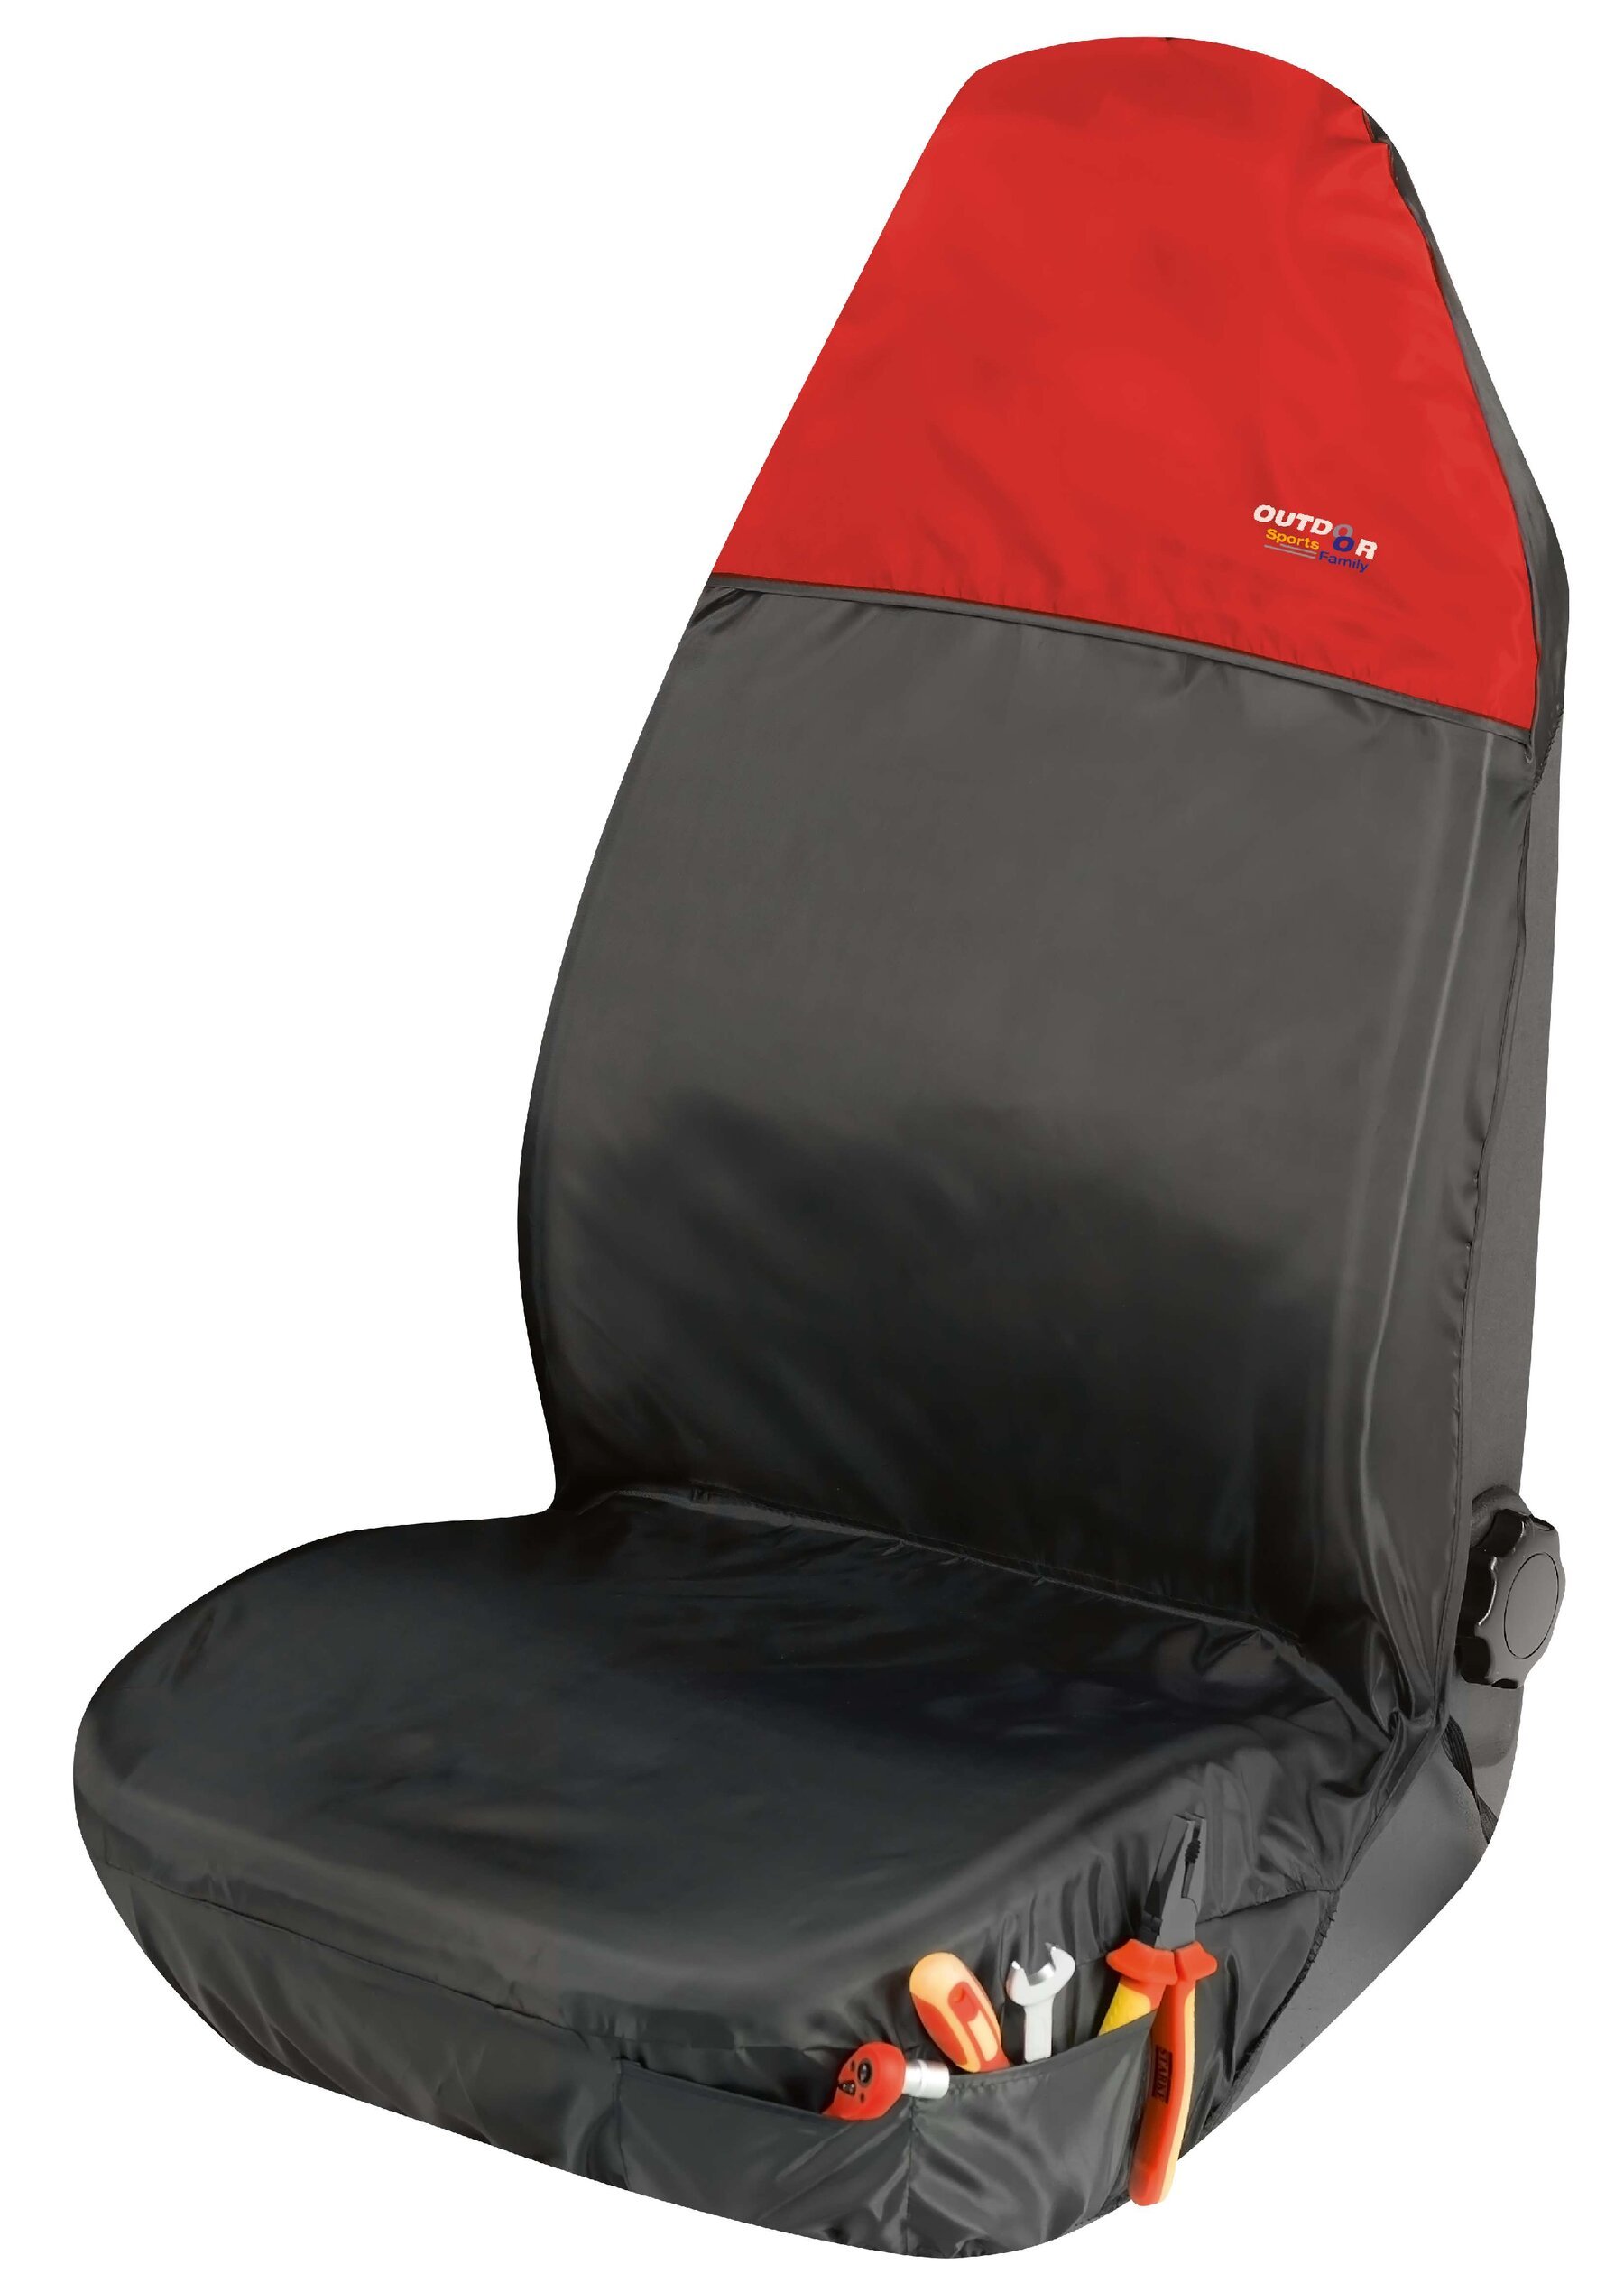 Outdoor Sports car Seat cover red